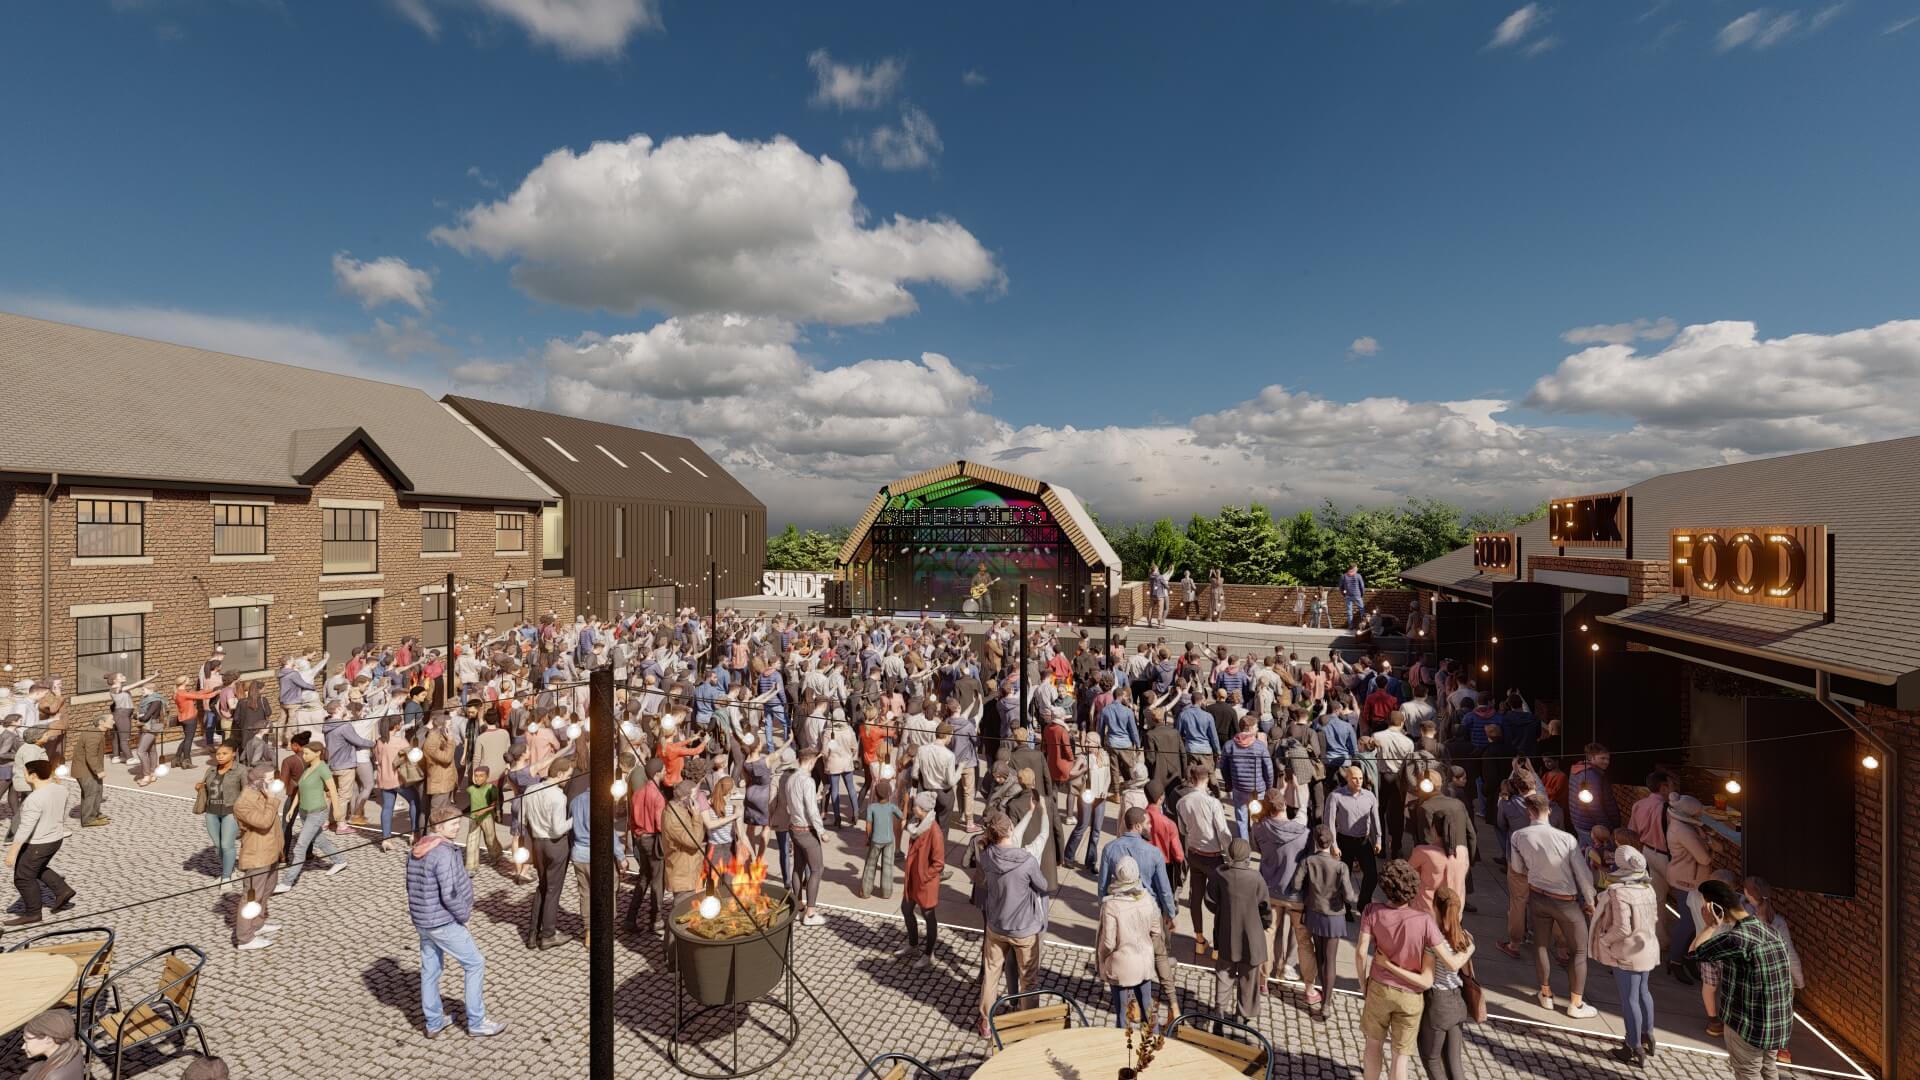 Planning Application Submitted for New City Venue at Sheepfolds